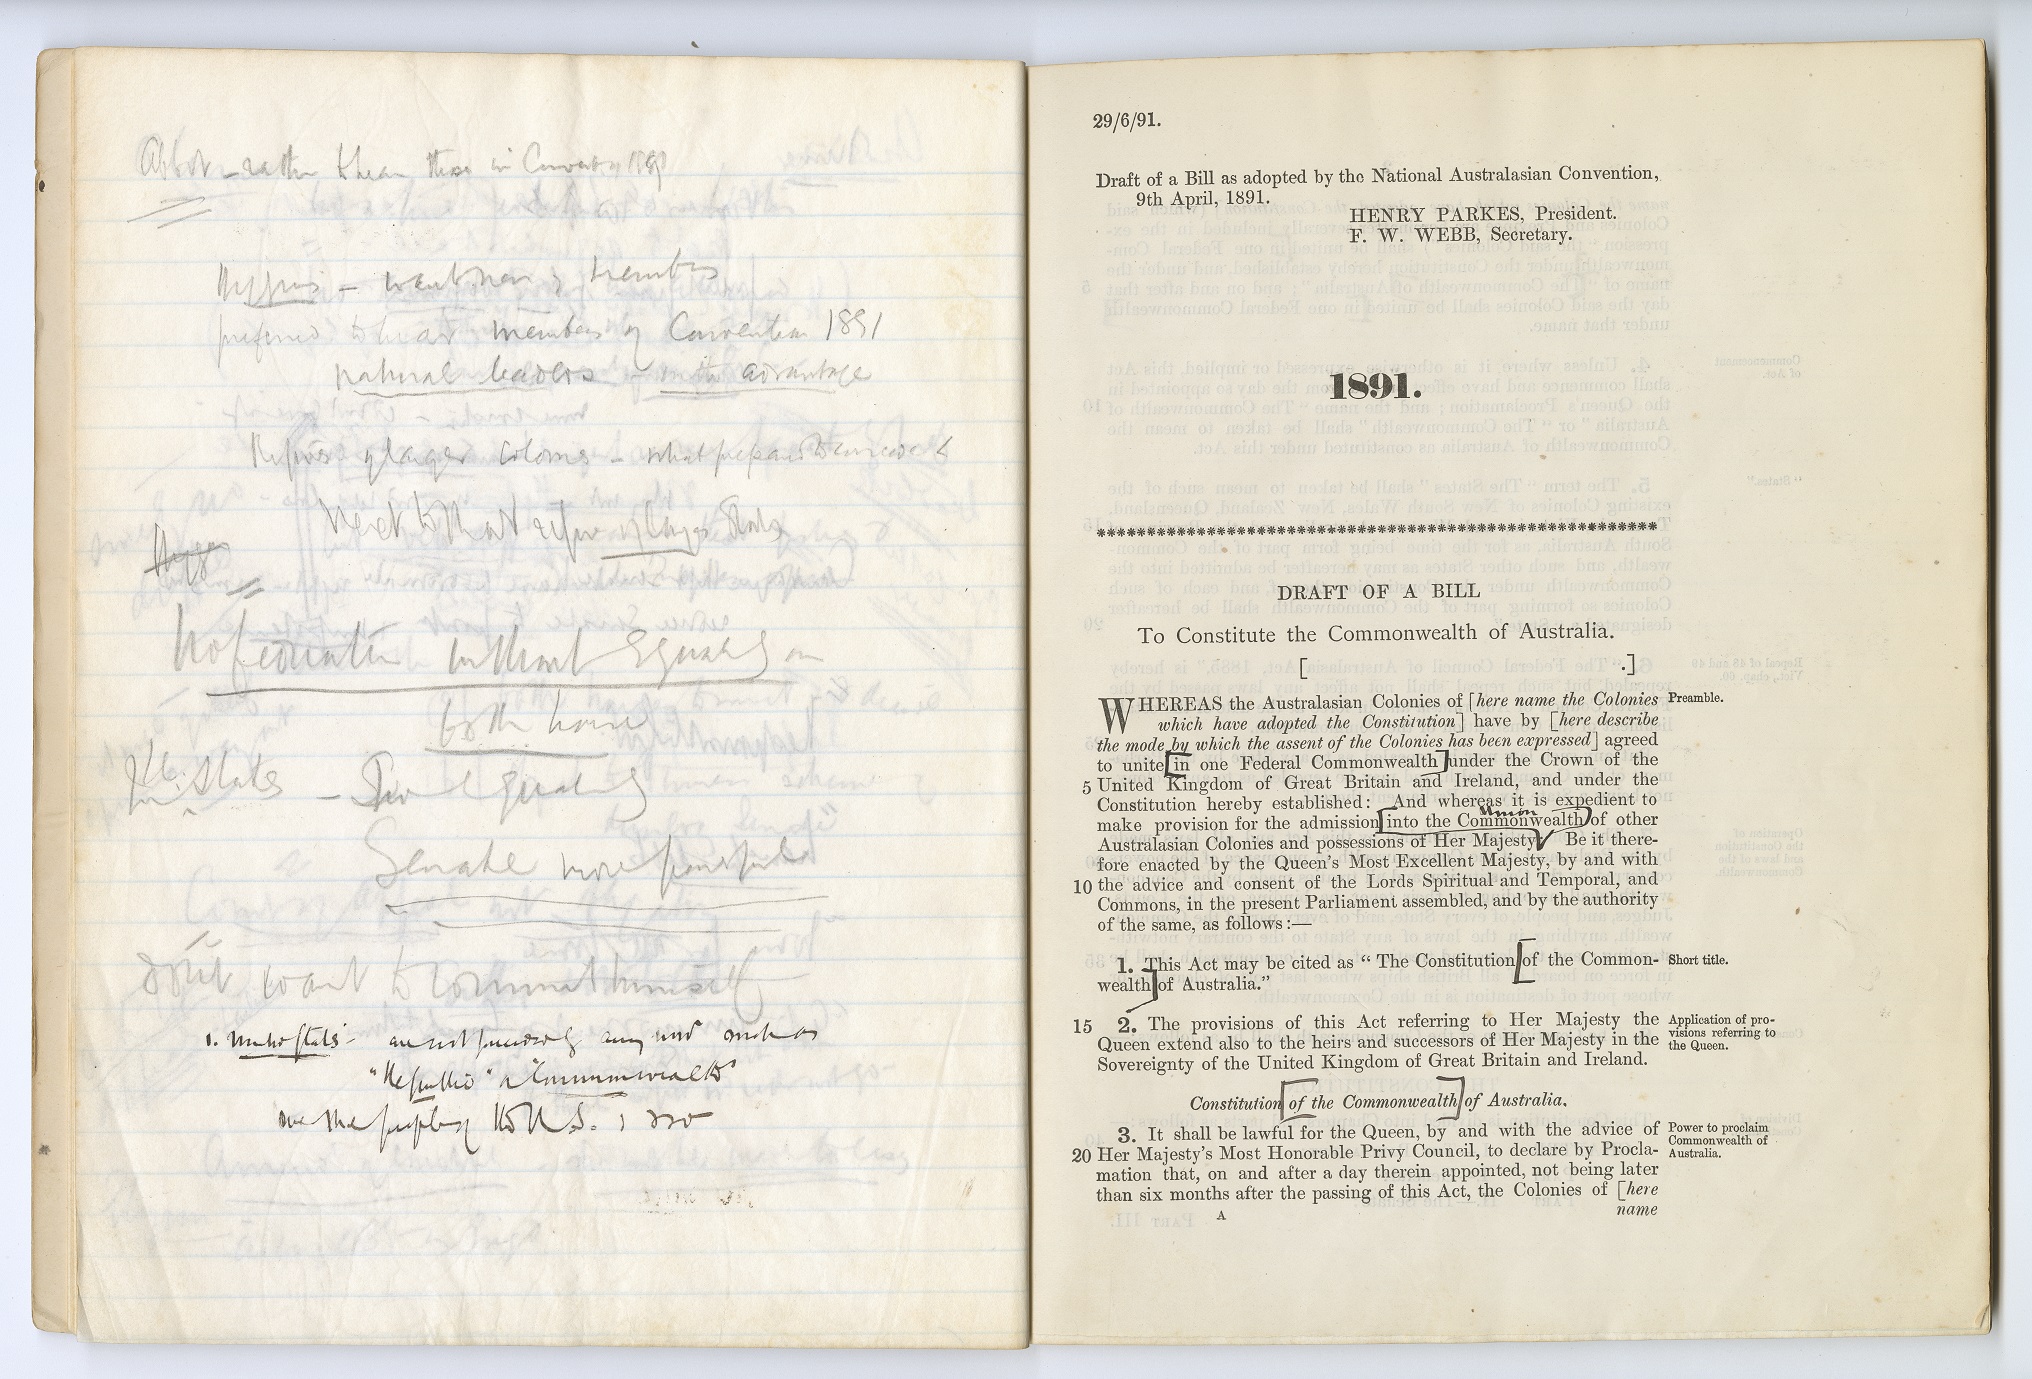 Sir Josiah’s handwritten notes on the 1891 Draft of a bill to constitute the Commonwealth of Australia SLSA: RBR 342.9402 b  